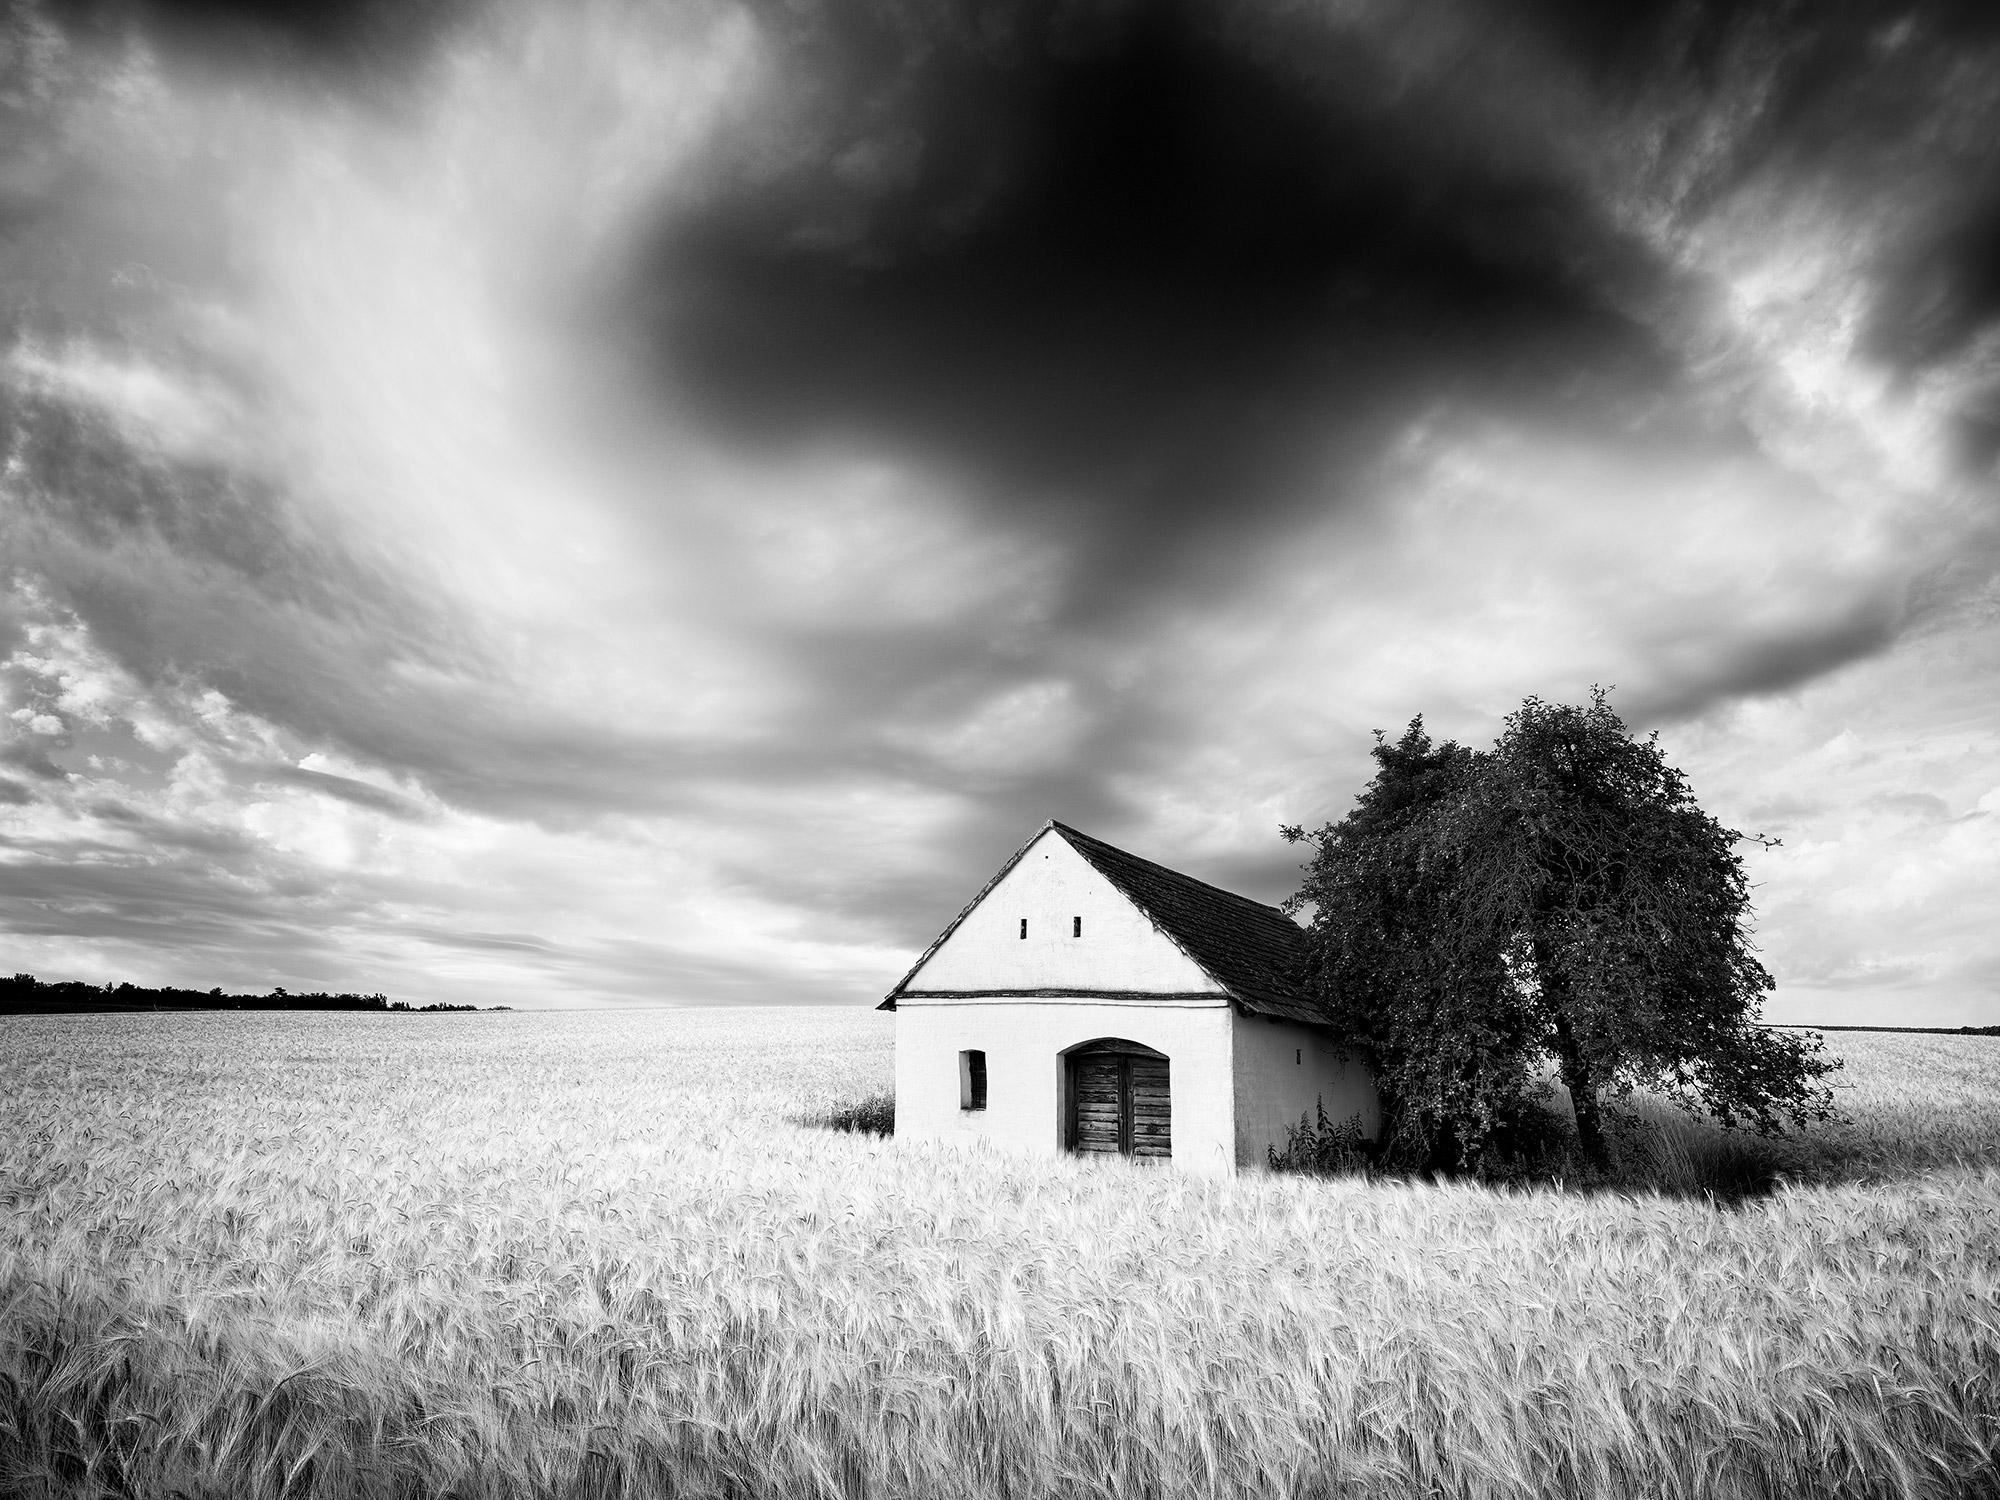 Gerald Berghammer Black and White Photograph - Wine Press House, wheat field, heavy clouds, black & white landscape photography